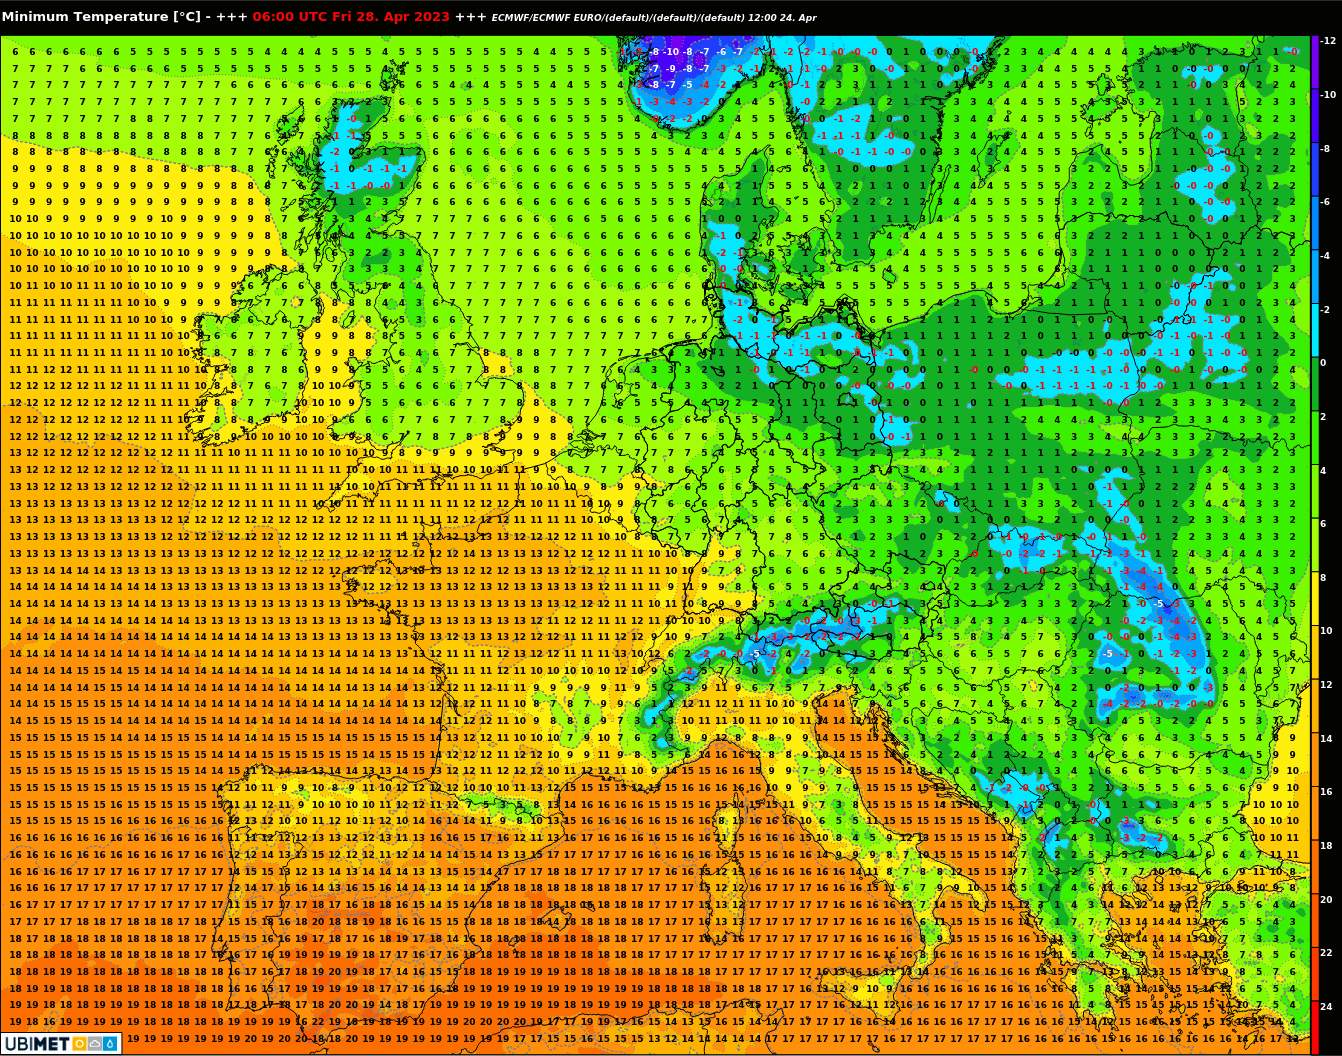 Fig. 3: Forecast low temperatures for Friday, April 29 8 am. Tropical nights are expected in southern Spain.; Source: UBIMET, MeteoNews